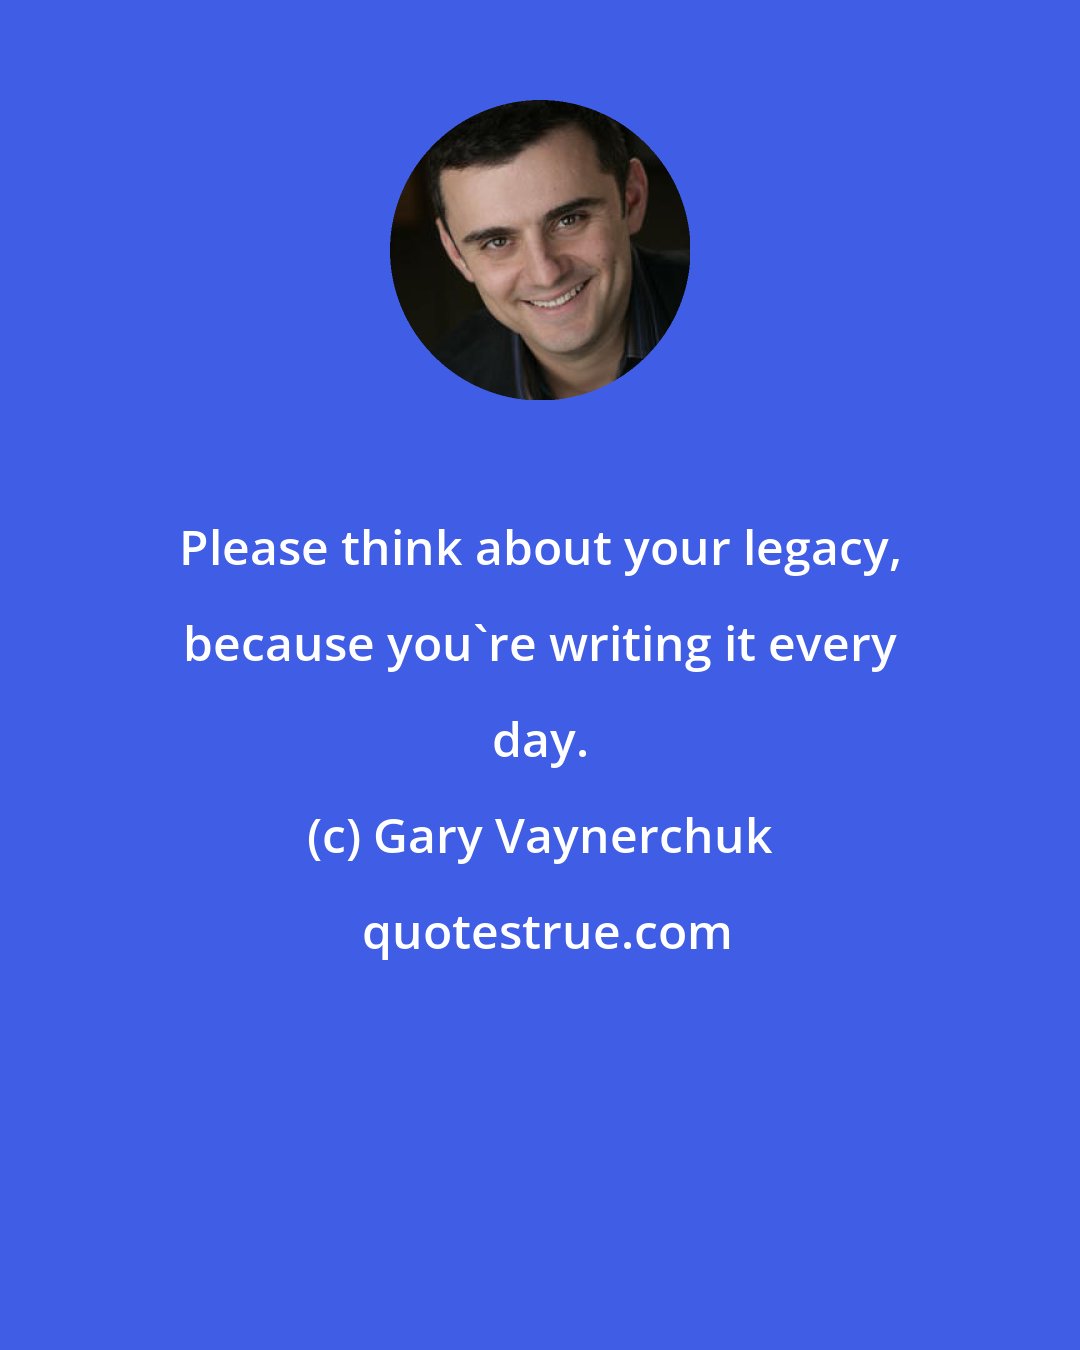 Gary Vaynerchuk: Please think about your legacy, because you're writing it every day.